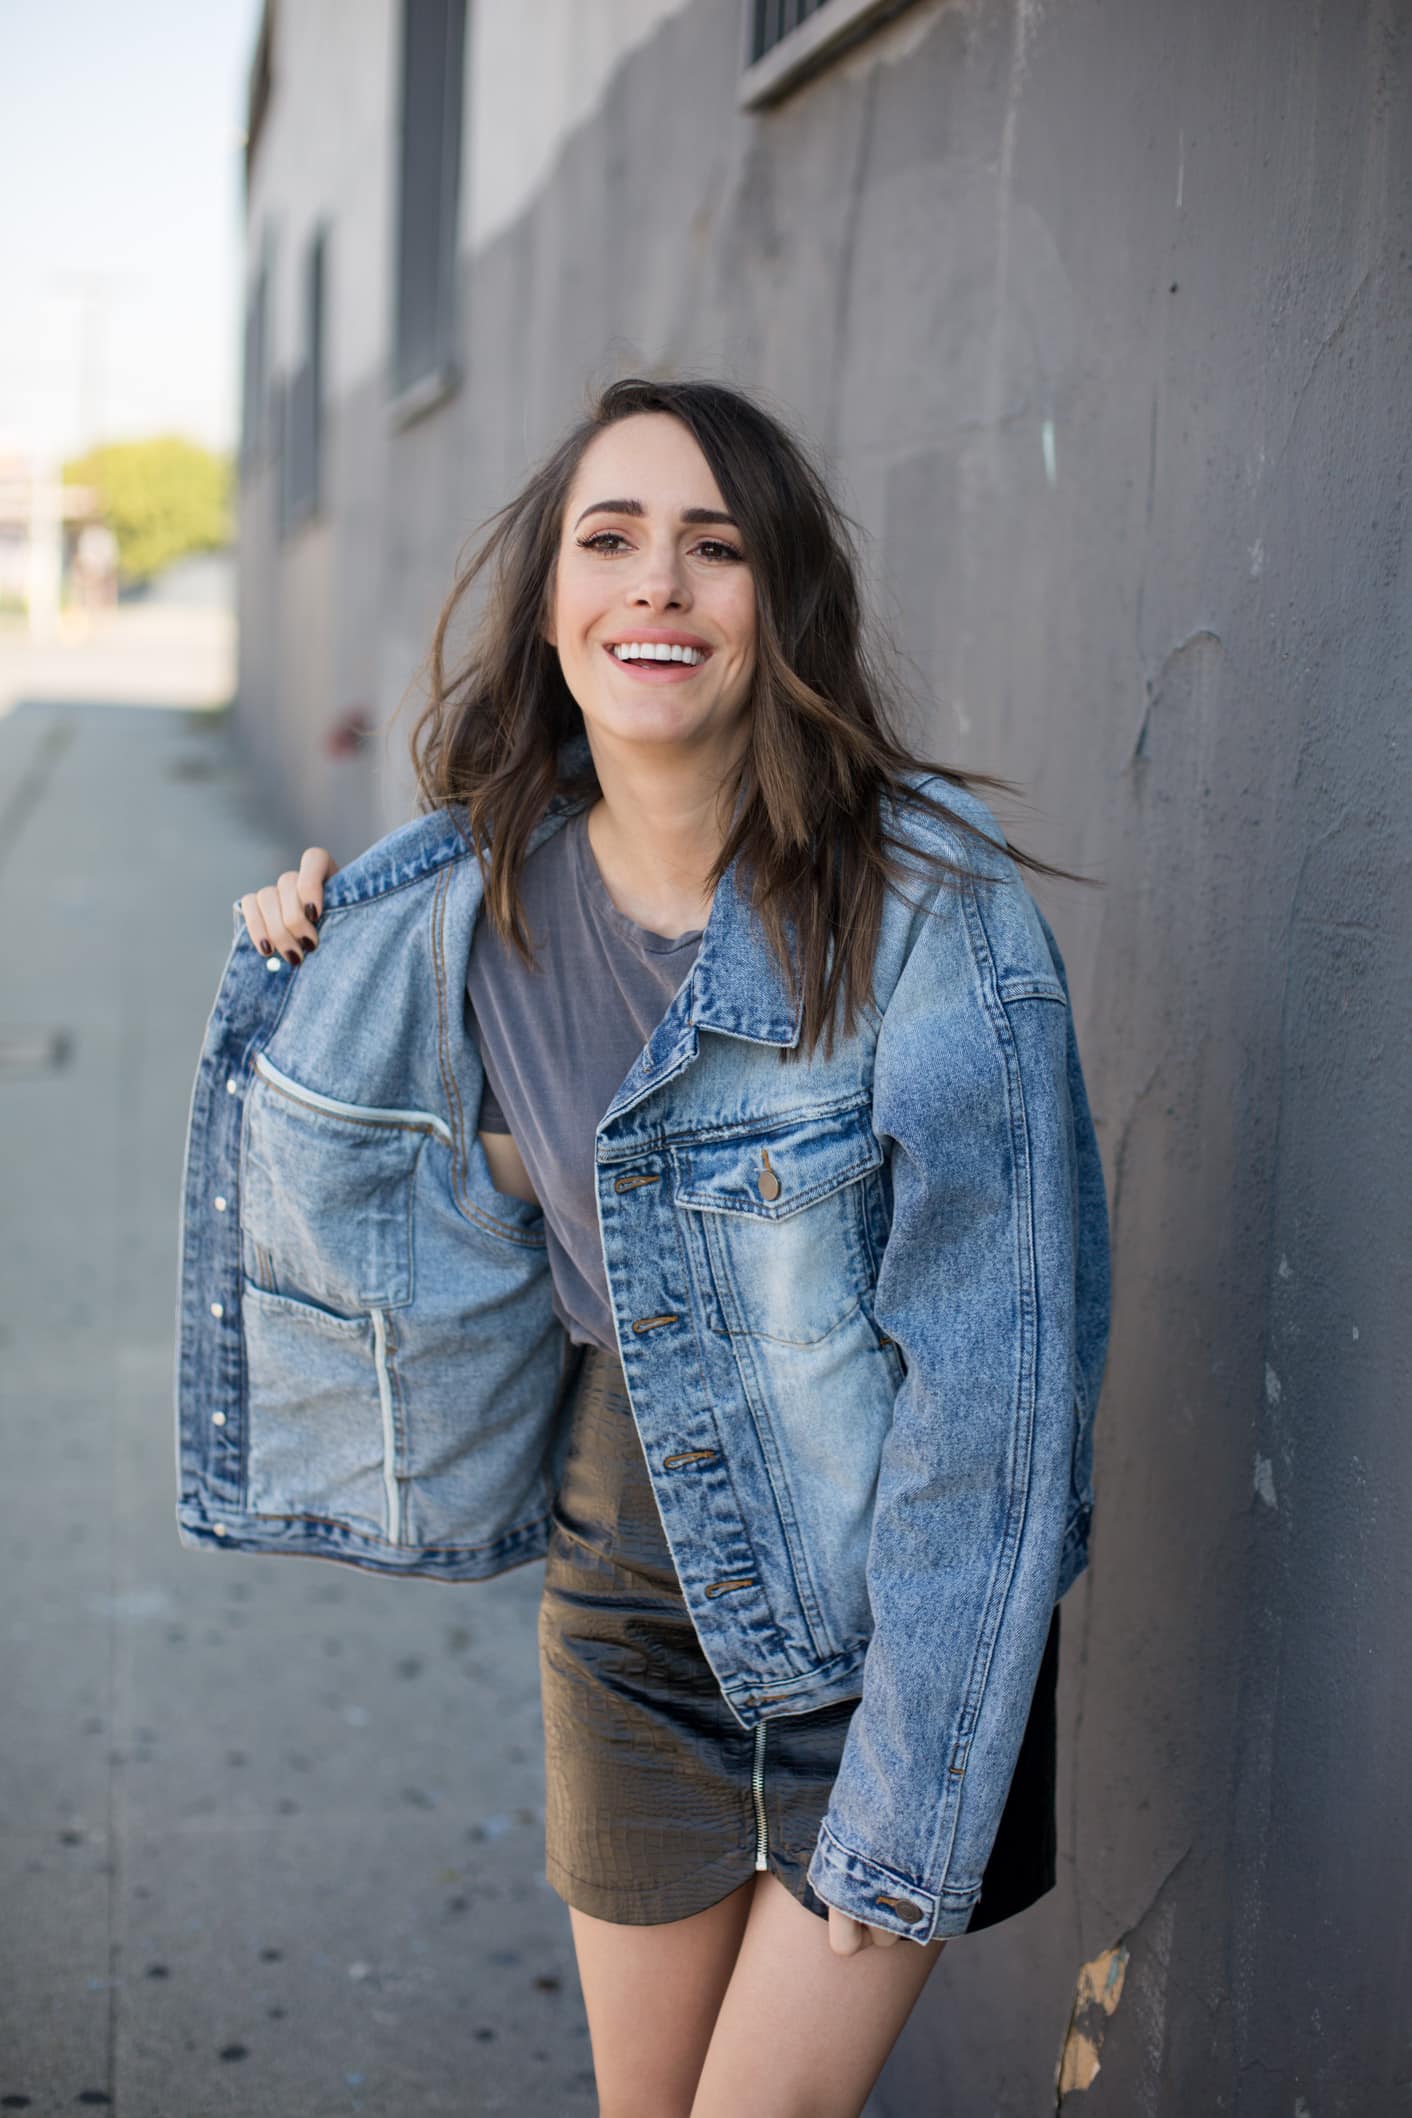 Louise Roe wearing a denim jacket and leather skirt